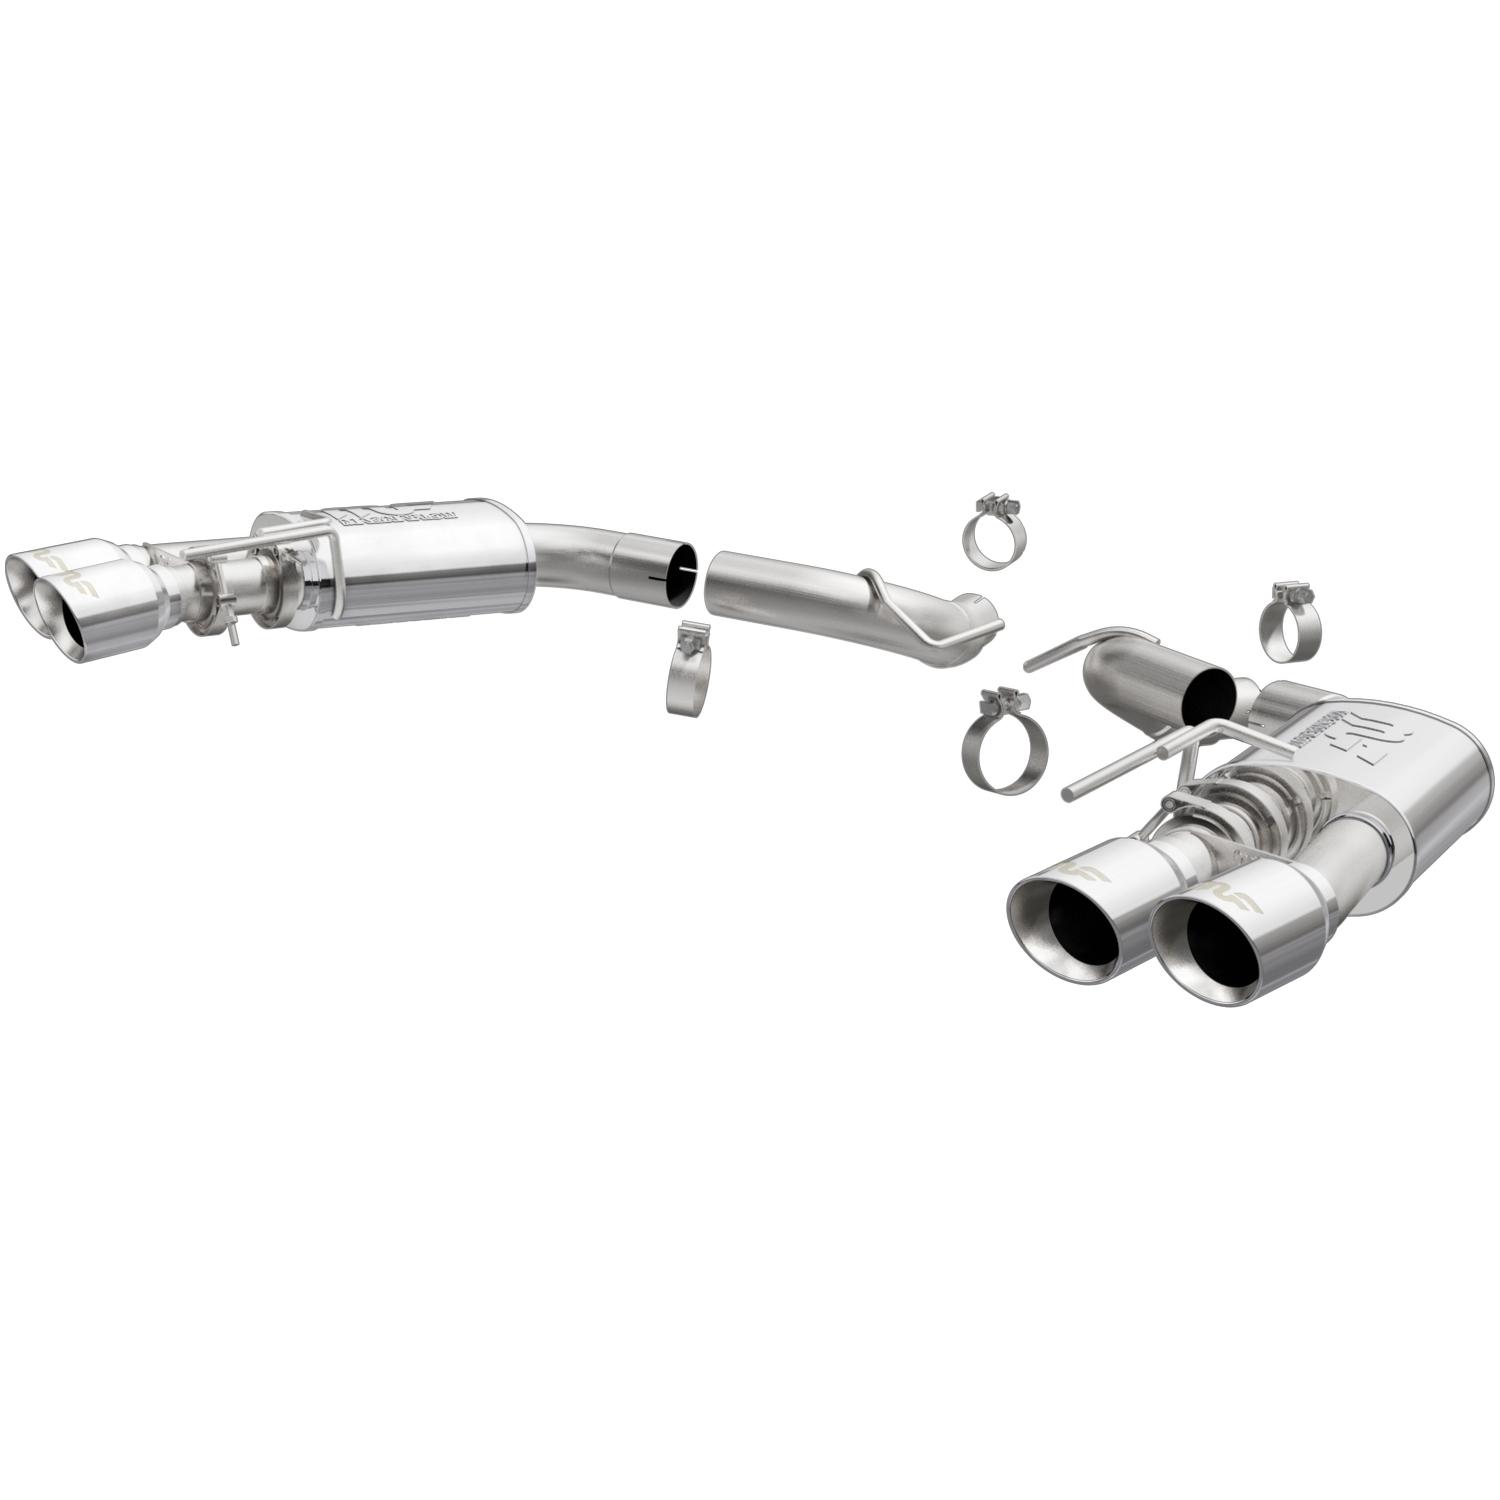 competition-series-stainless-axle-back-system